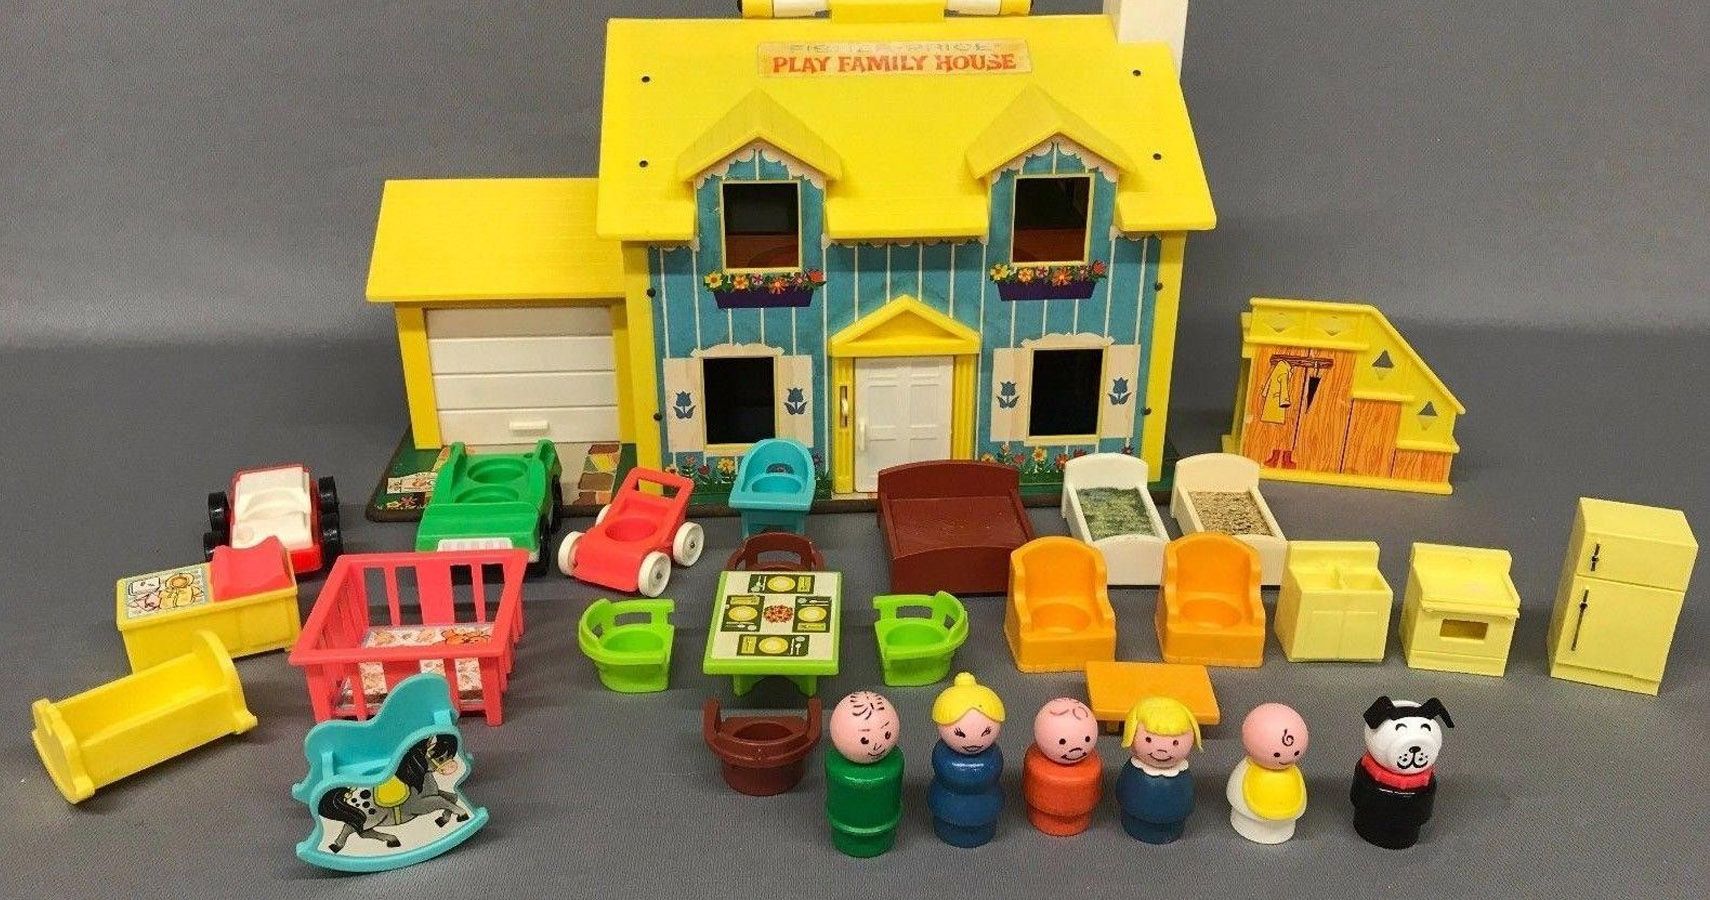 25 Photos of the Most Iconic Childhood Toys From the 80s